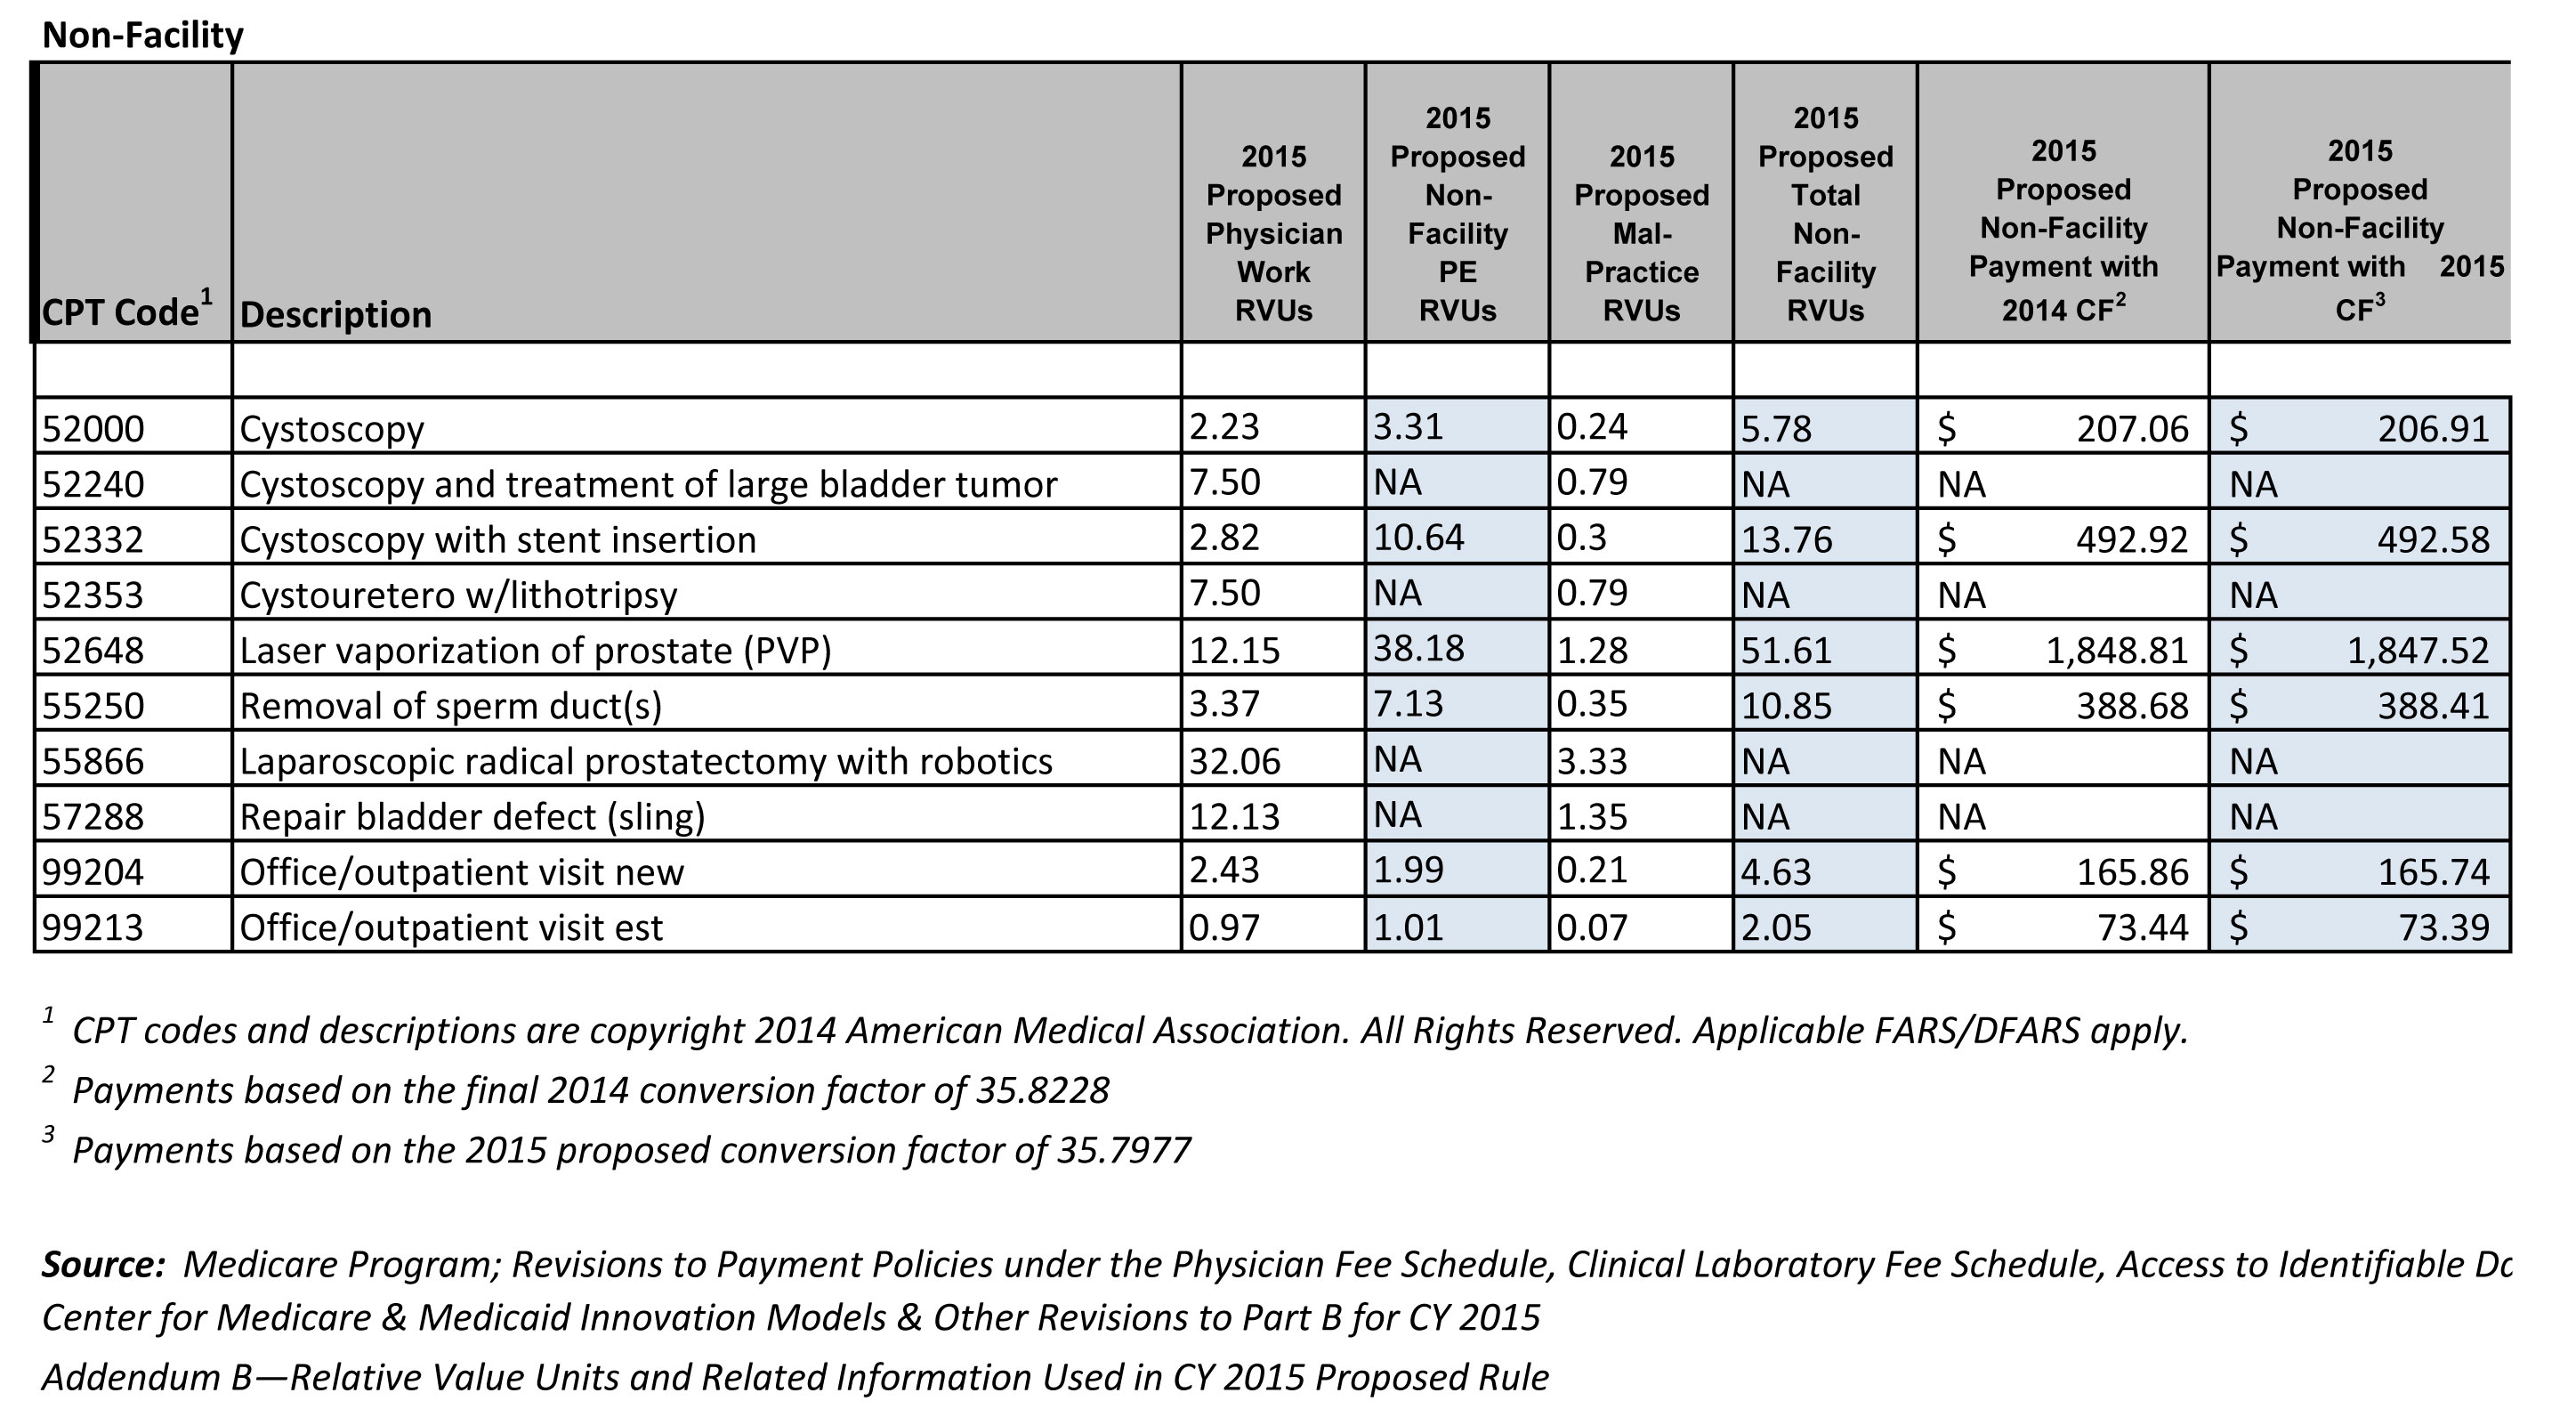 CMS Releases Proposed Rule for the 2015 Physician Fee Schedule